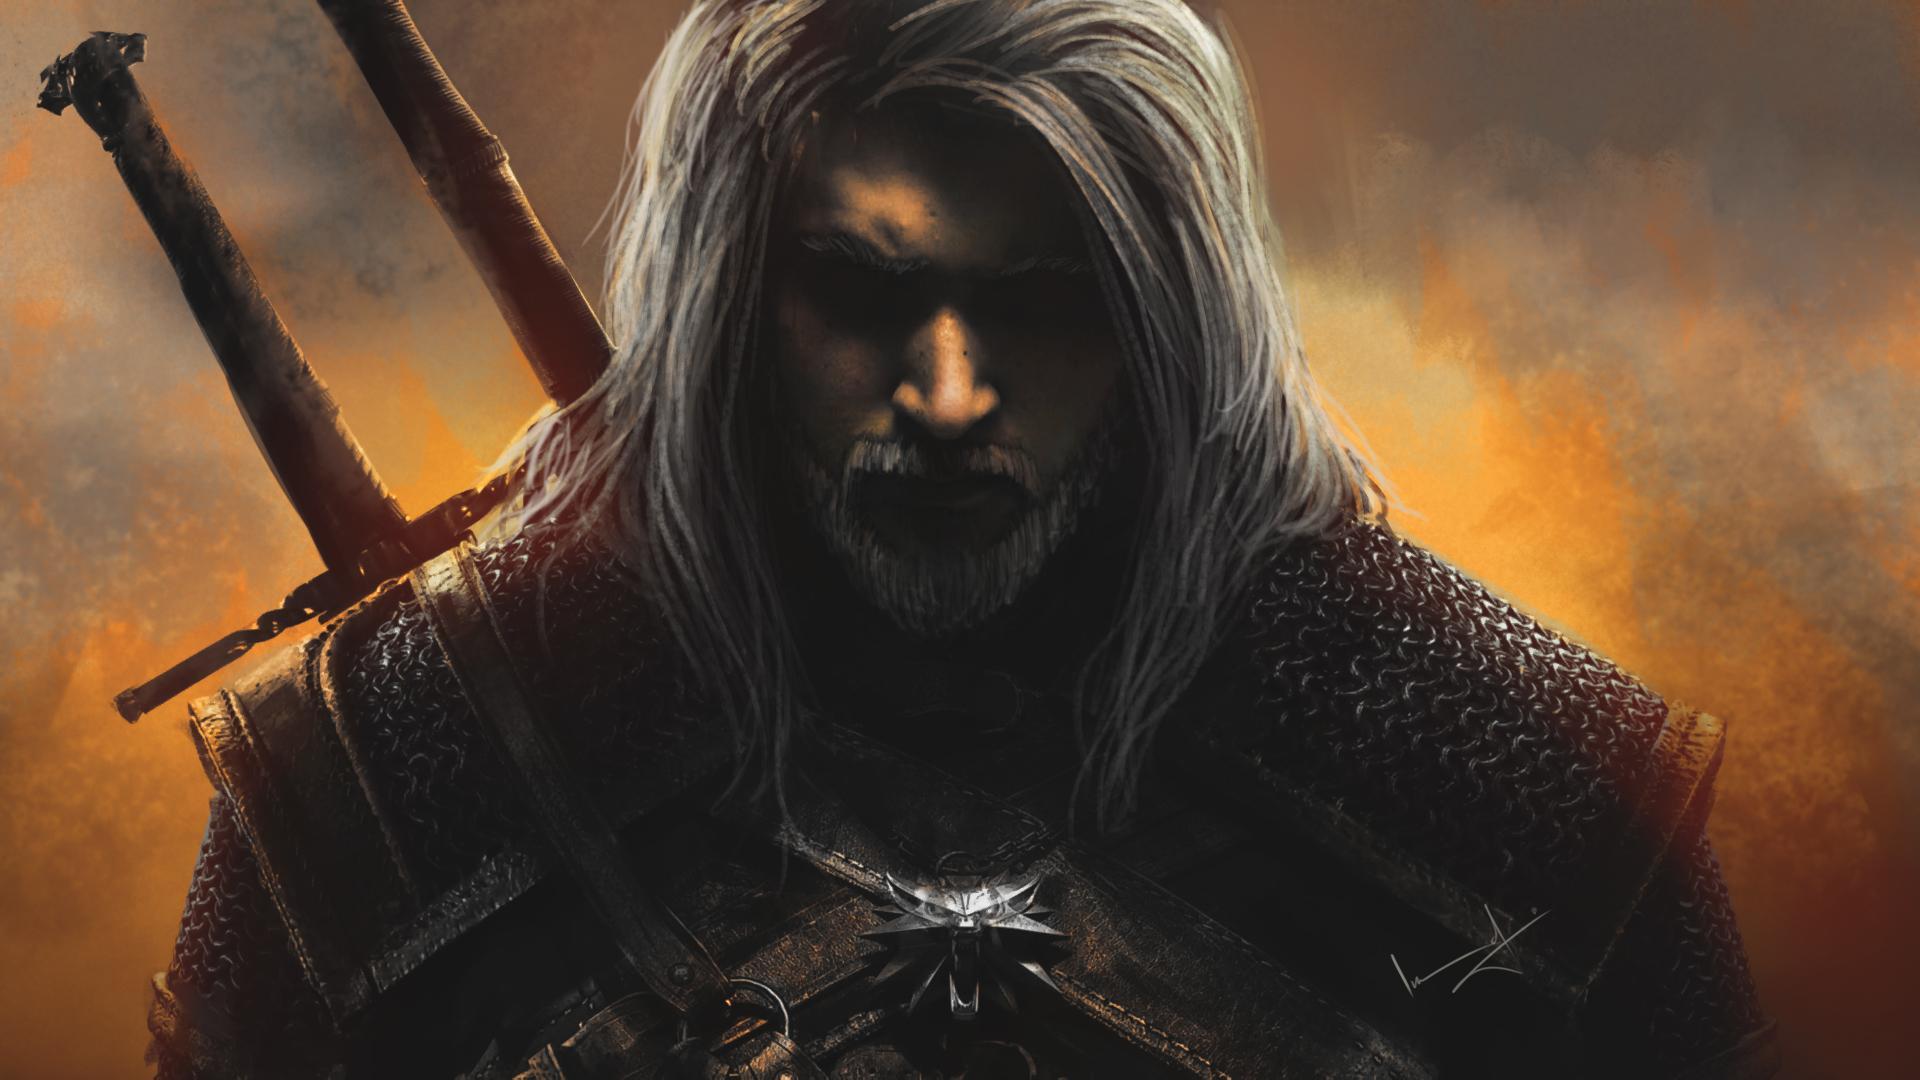 NETFLIX Series do you think of this Geralt?